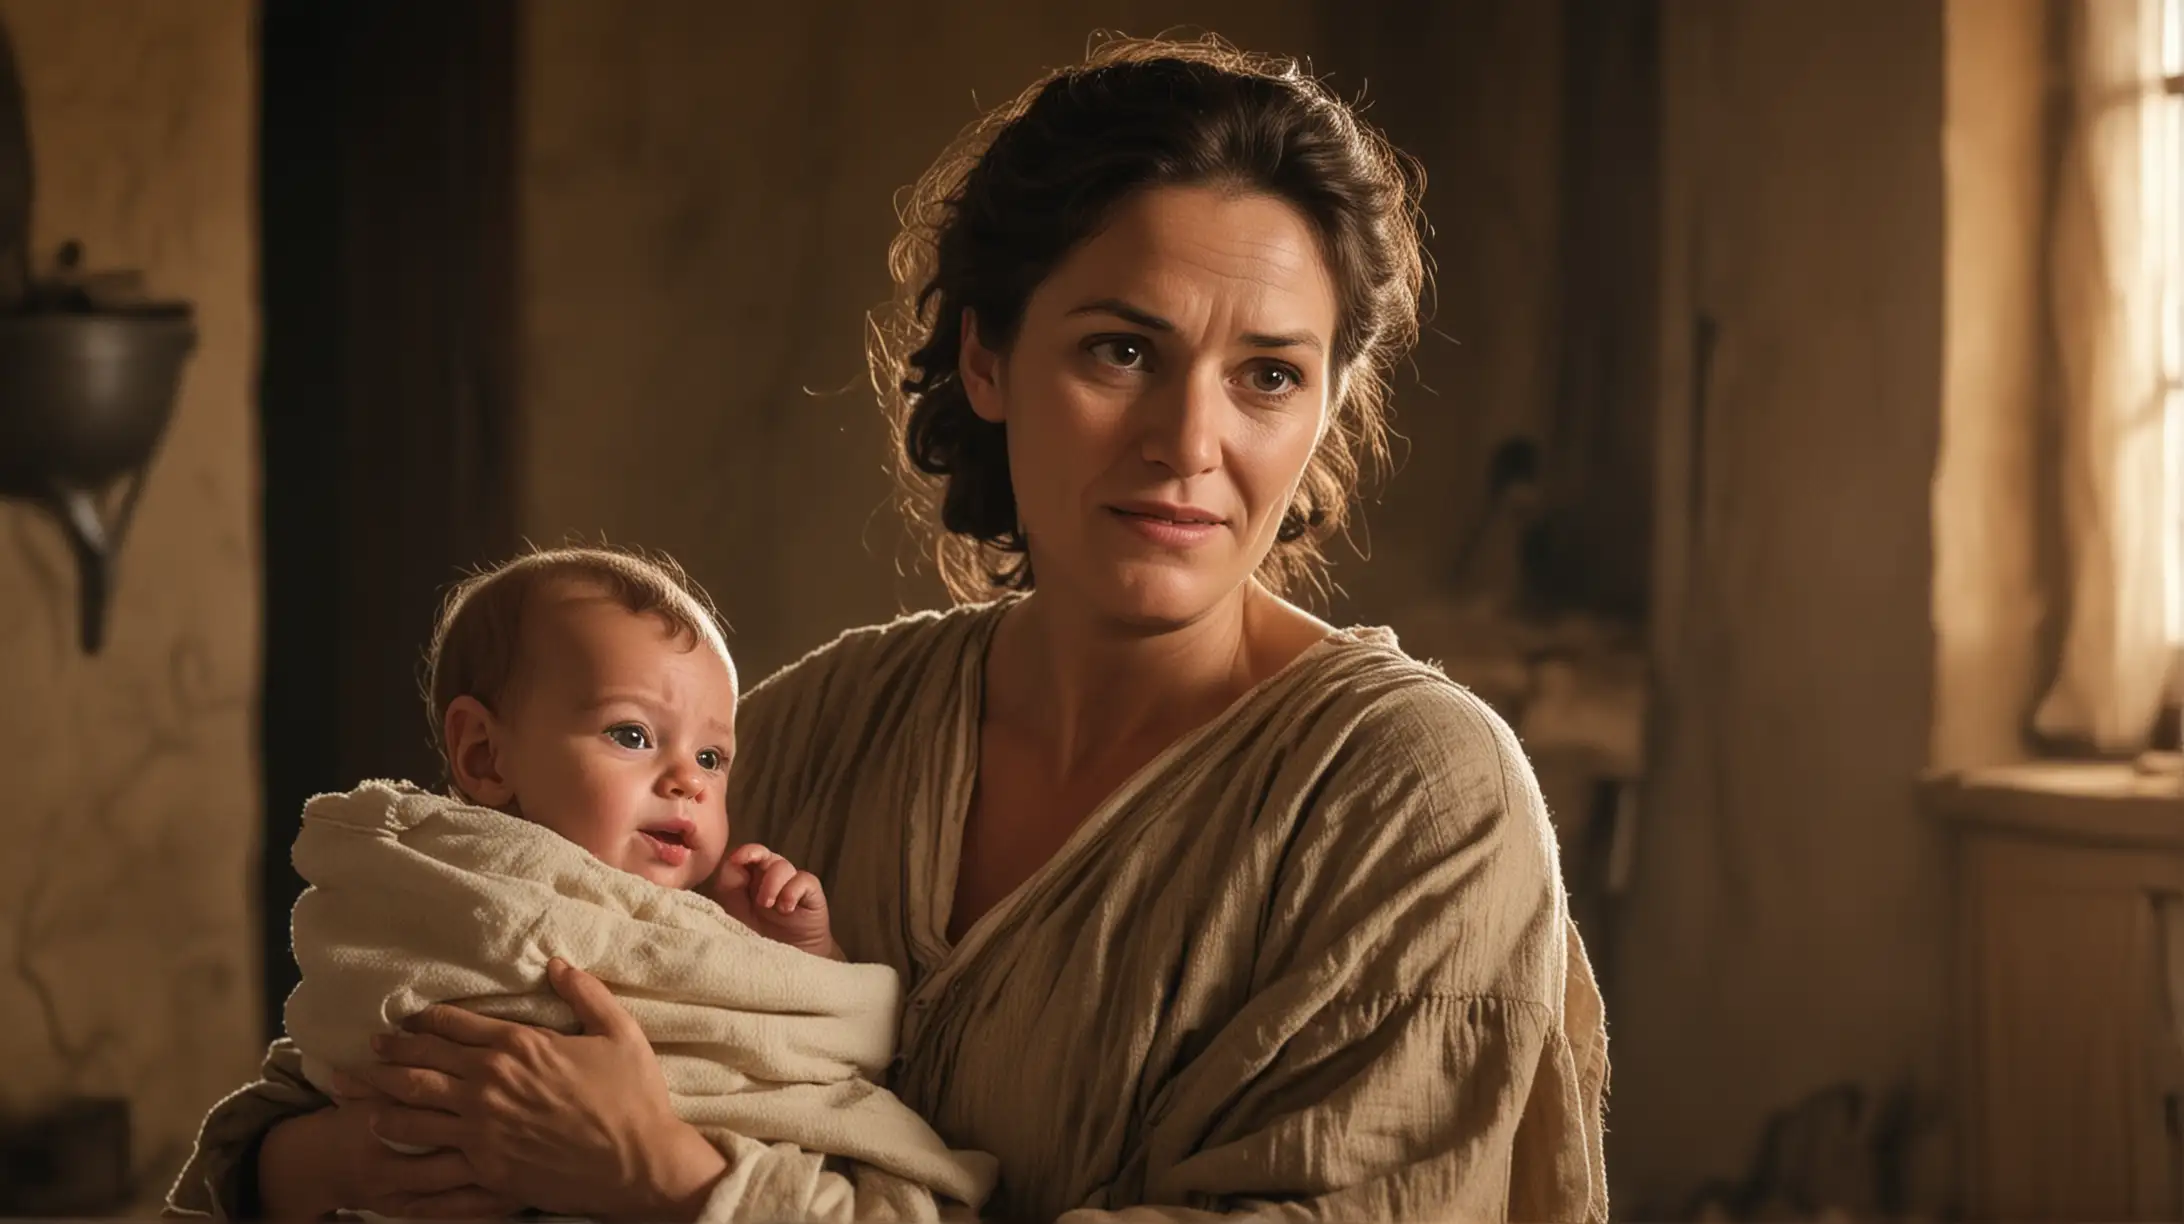 Middle Aged Woman with Baby in Biblical Era Setting